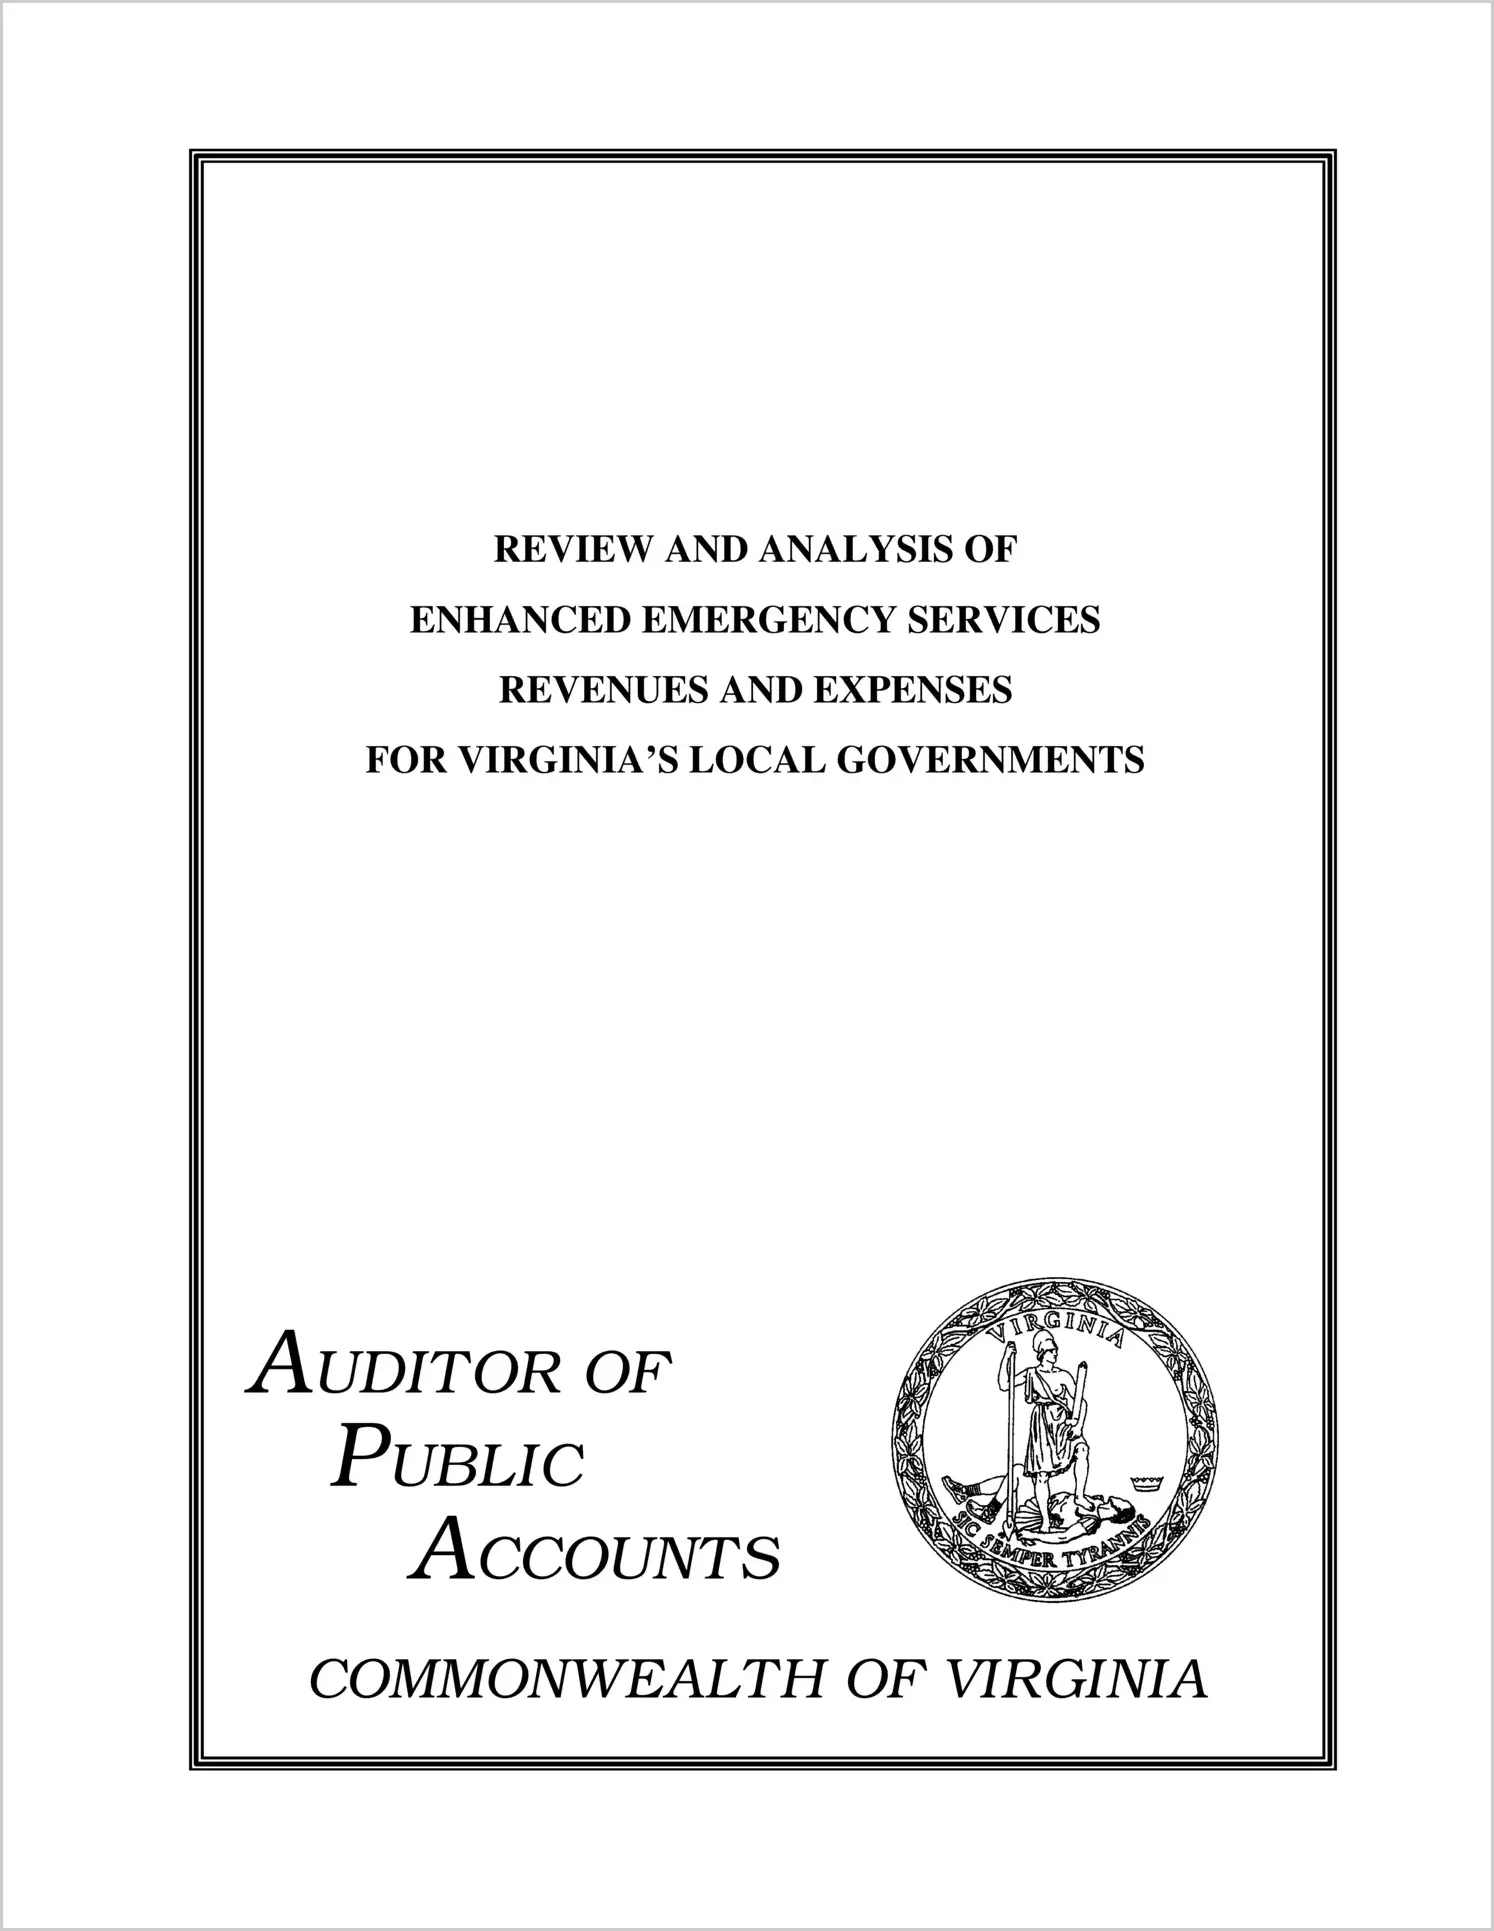 Special ReportReview and Analysis of Enhanced Emergency Services Revenues and Expenses for Virginia`s Local Governments(Report Date: 11/5/1999)